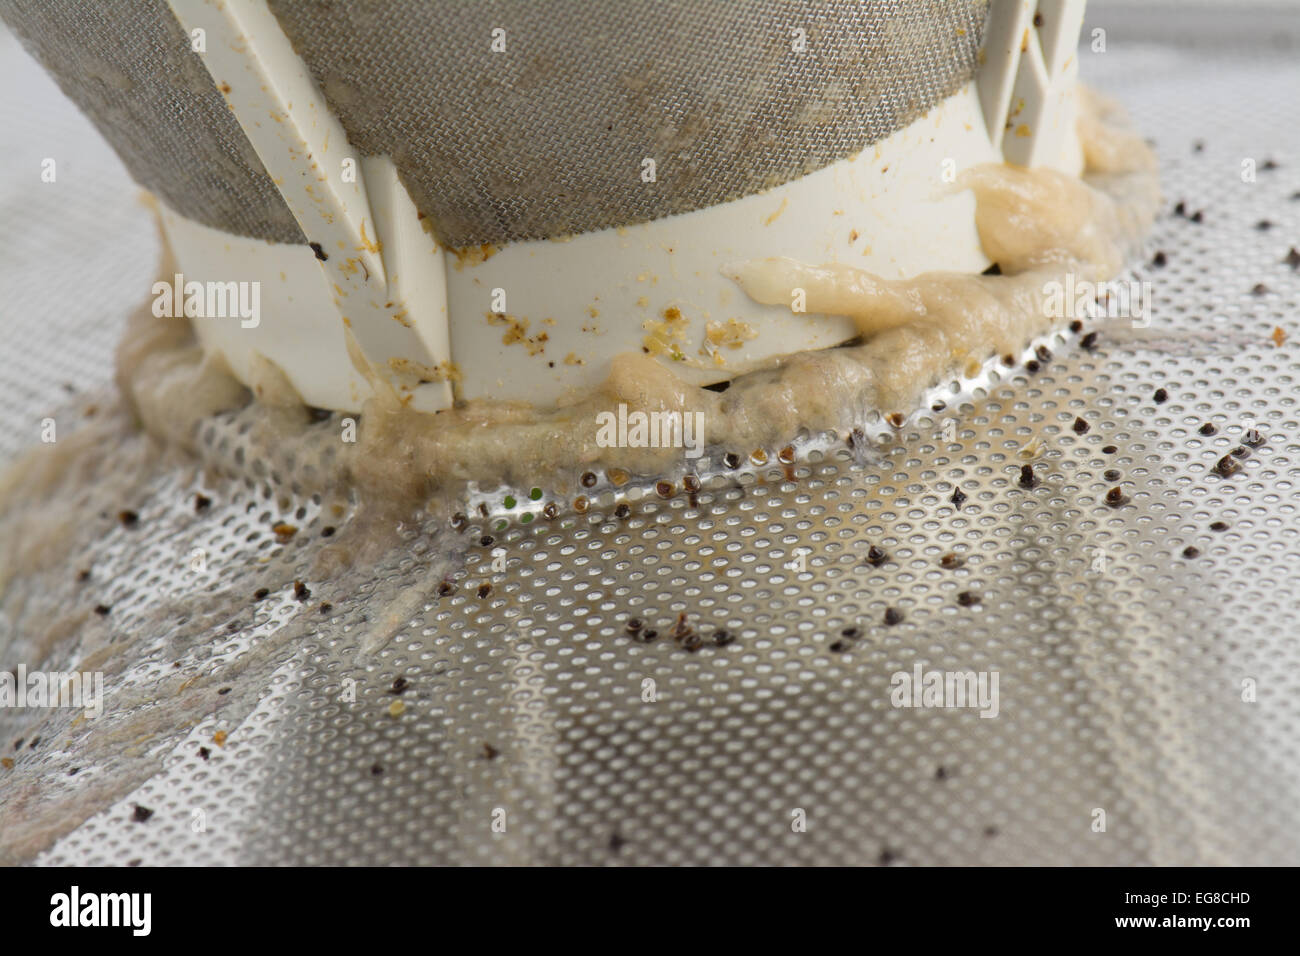 close up of dirty dishwasher filter Stock Photo - Alamy